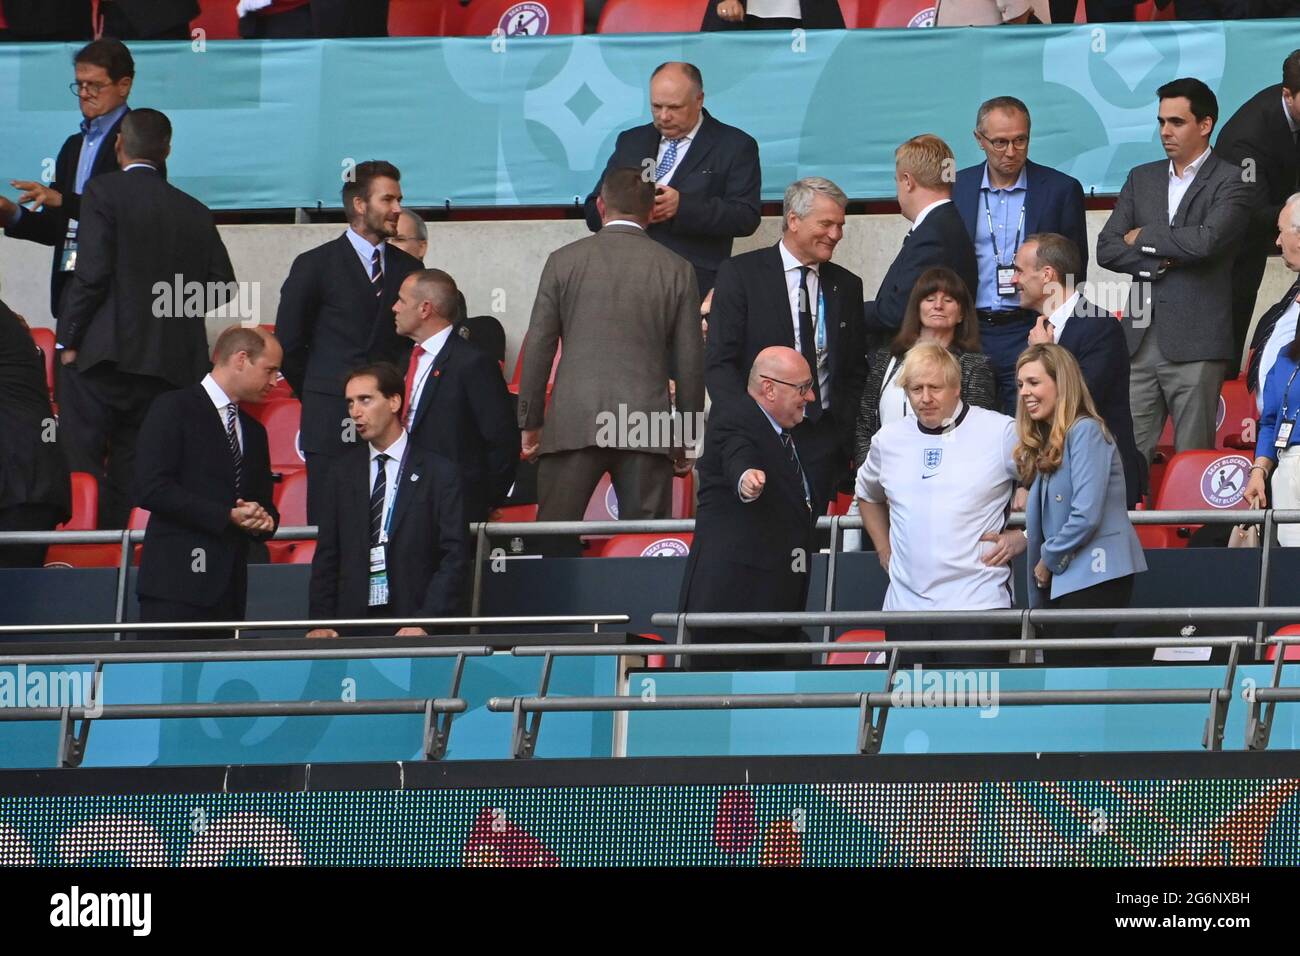 View of the VIP box, in the withte Prime Minister Boris JOHNSON with his wife Carrie SYMONDS, left Prince WILLIAM, feature, symbol photo, border motif, semifinals, game M50, England (ENG)